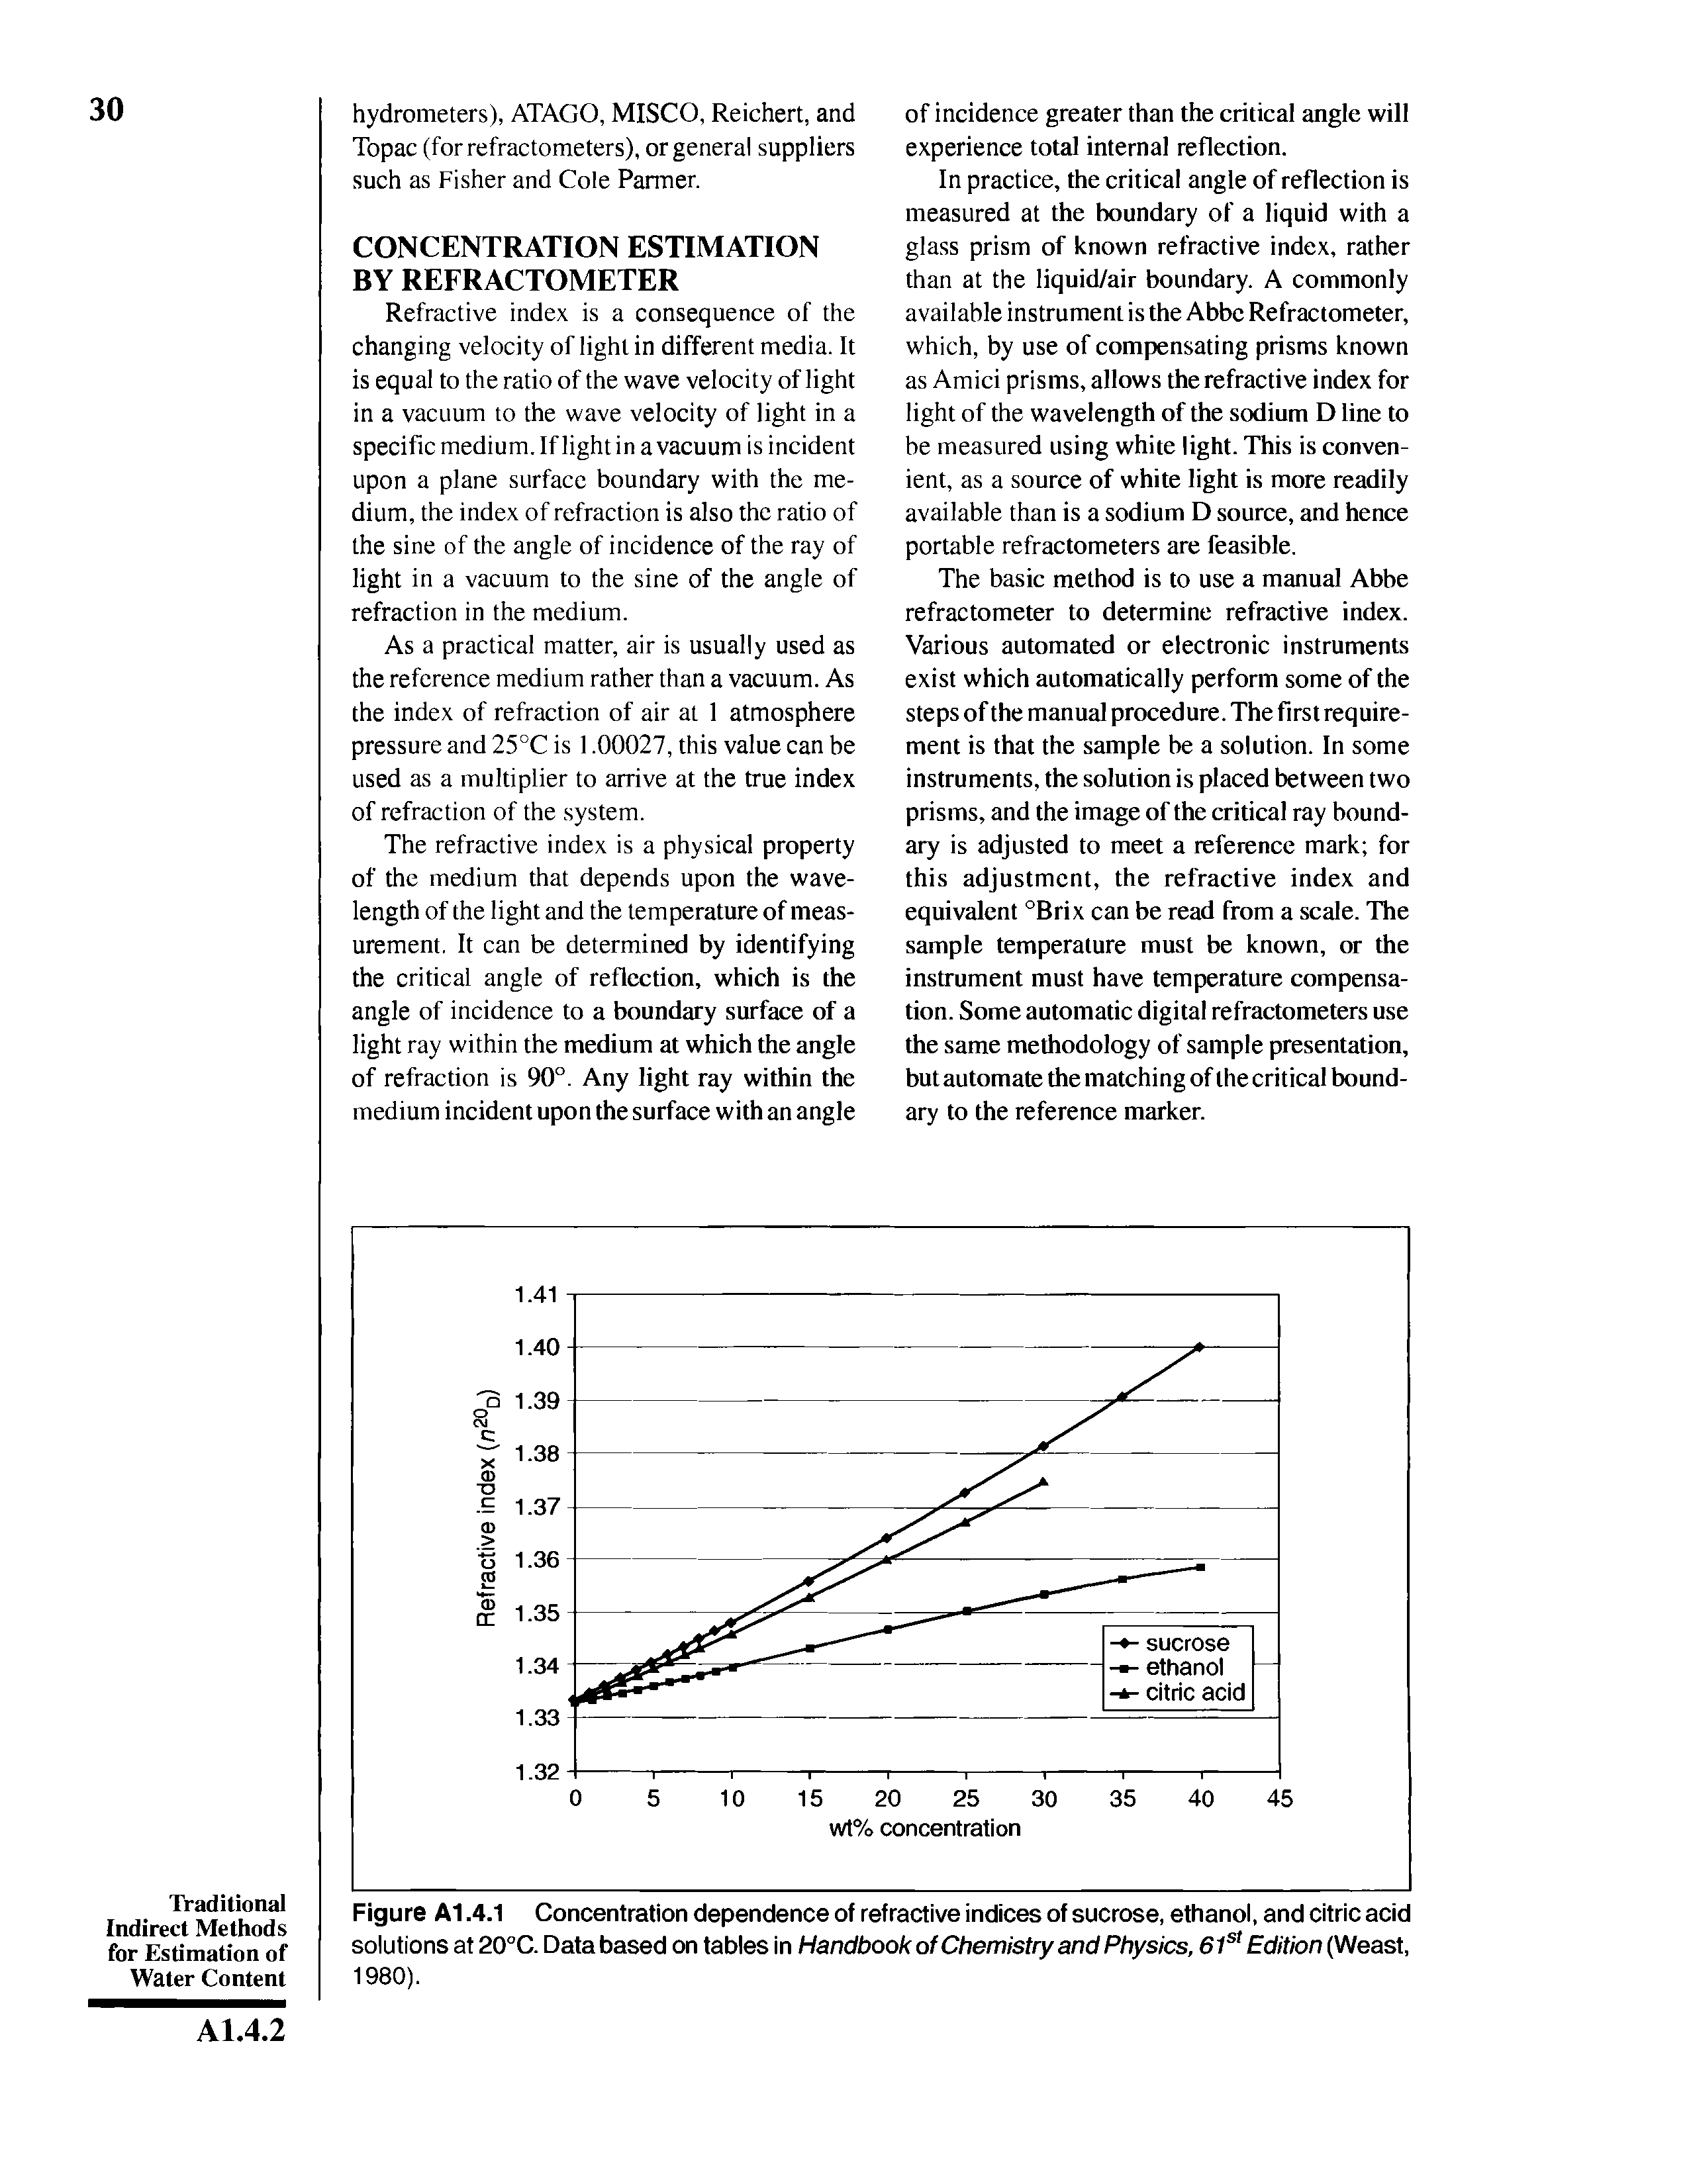 Figure A1.4.1 Concentration dependence of refractive indices of sucrose, ethanol, and citric acid solutions at 20°C. Data based on tables in Handbookof Chemistry and Physics, 61st Edition (Weast, 1980).